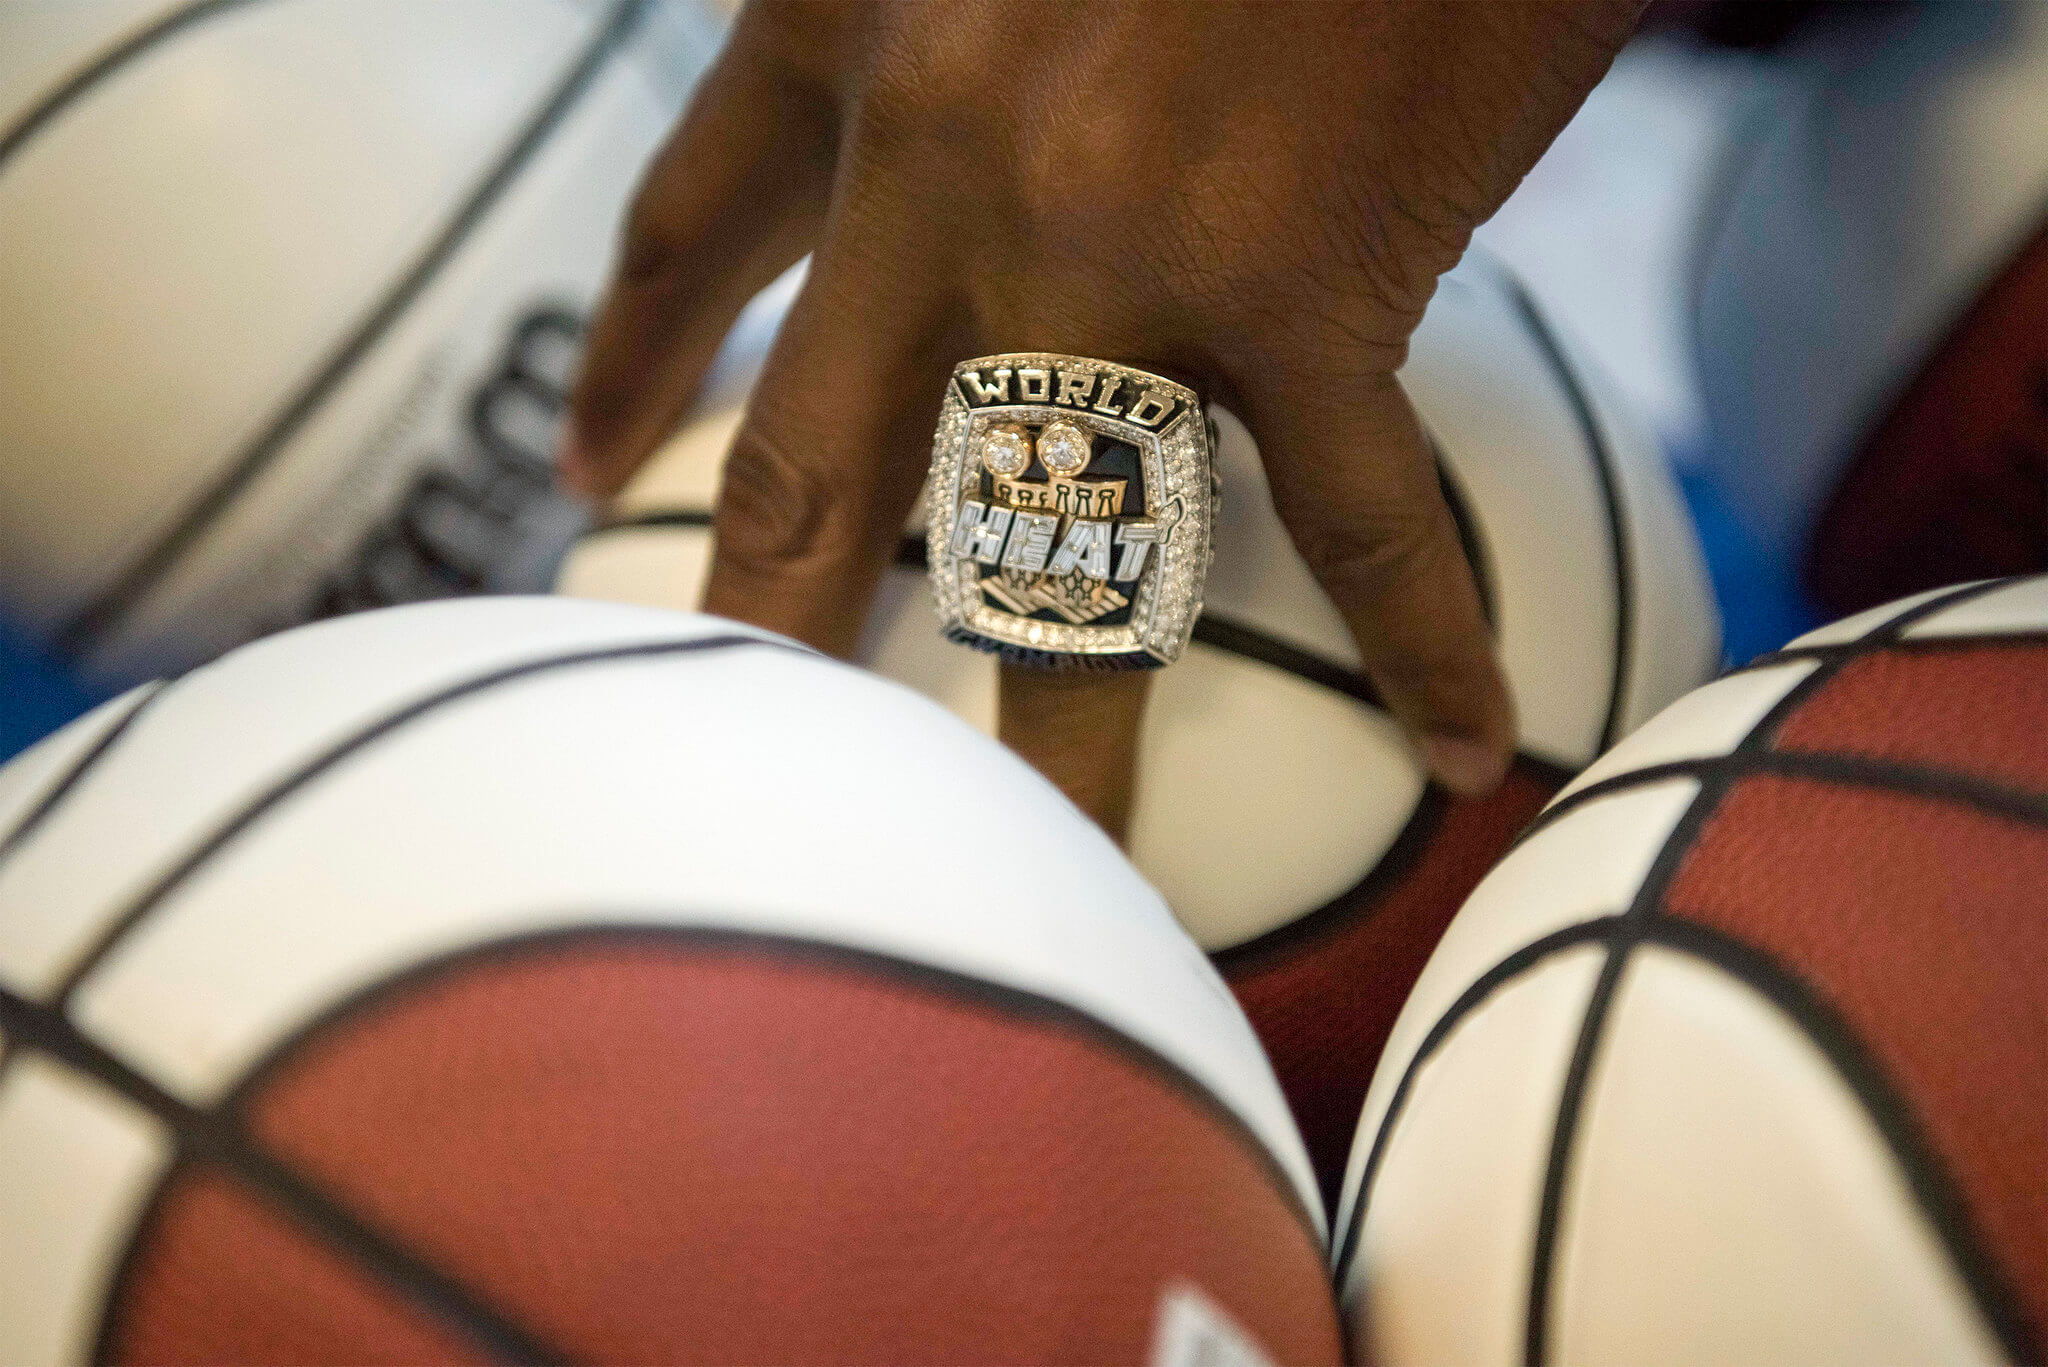 Kobe Bryant Lakers Ring He Gifted Mom Sells for $206,000!!!